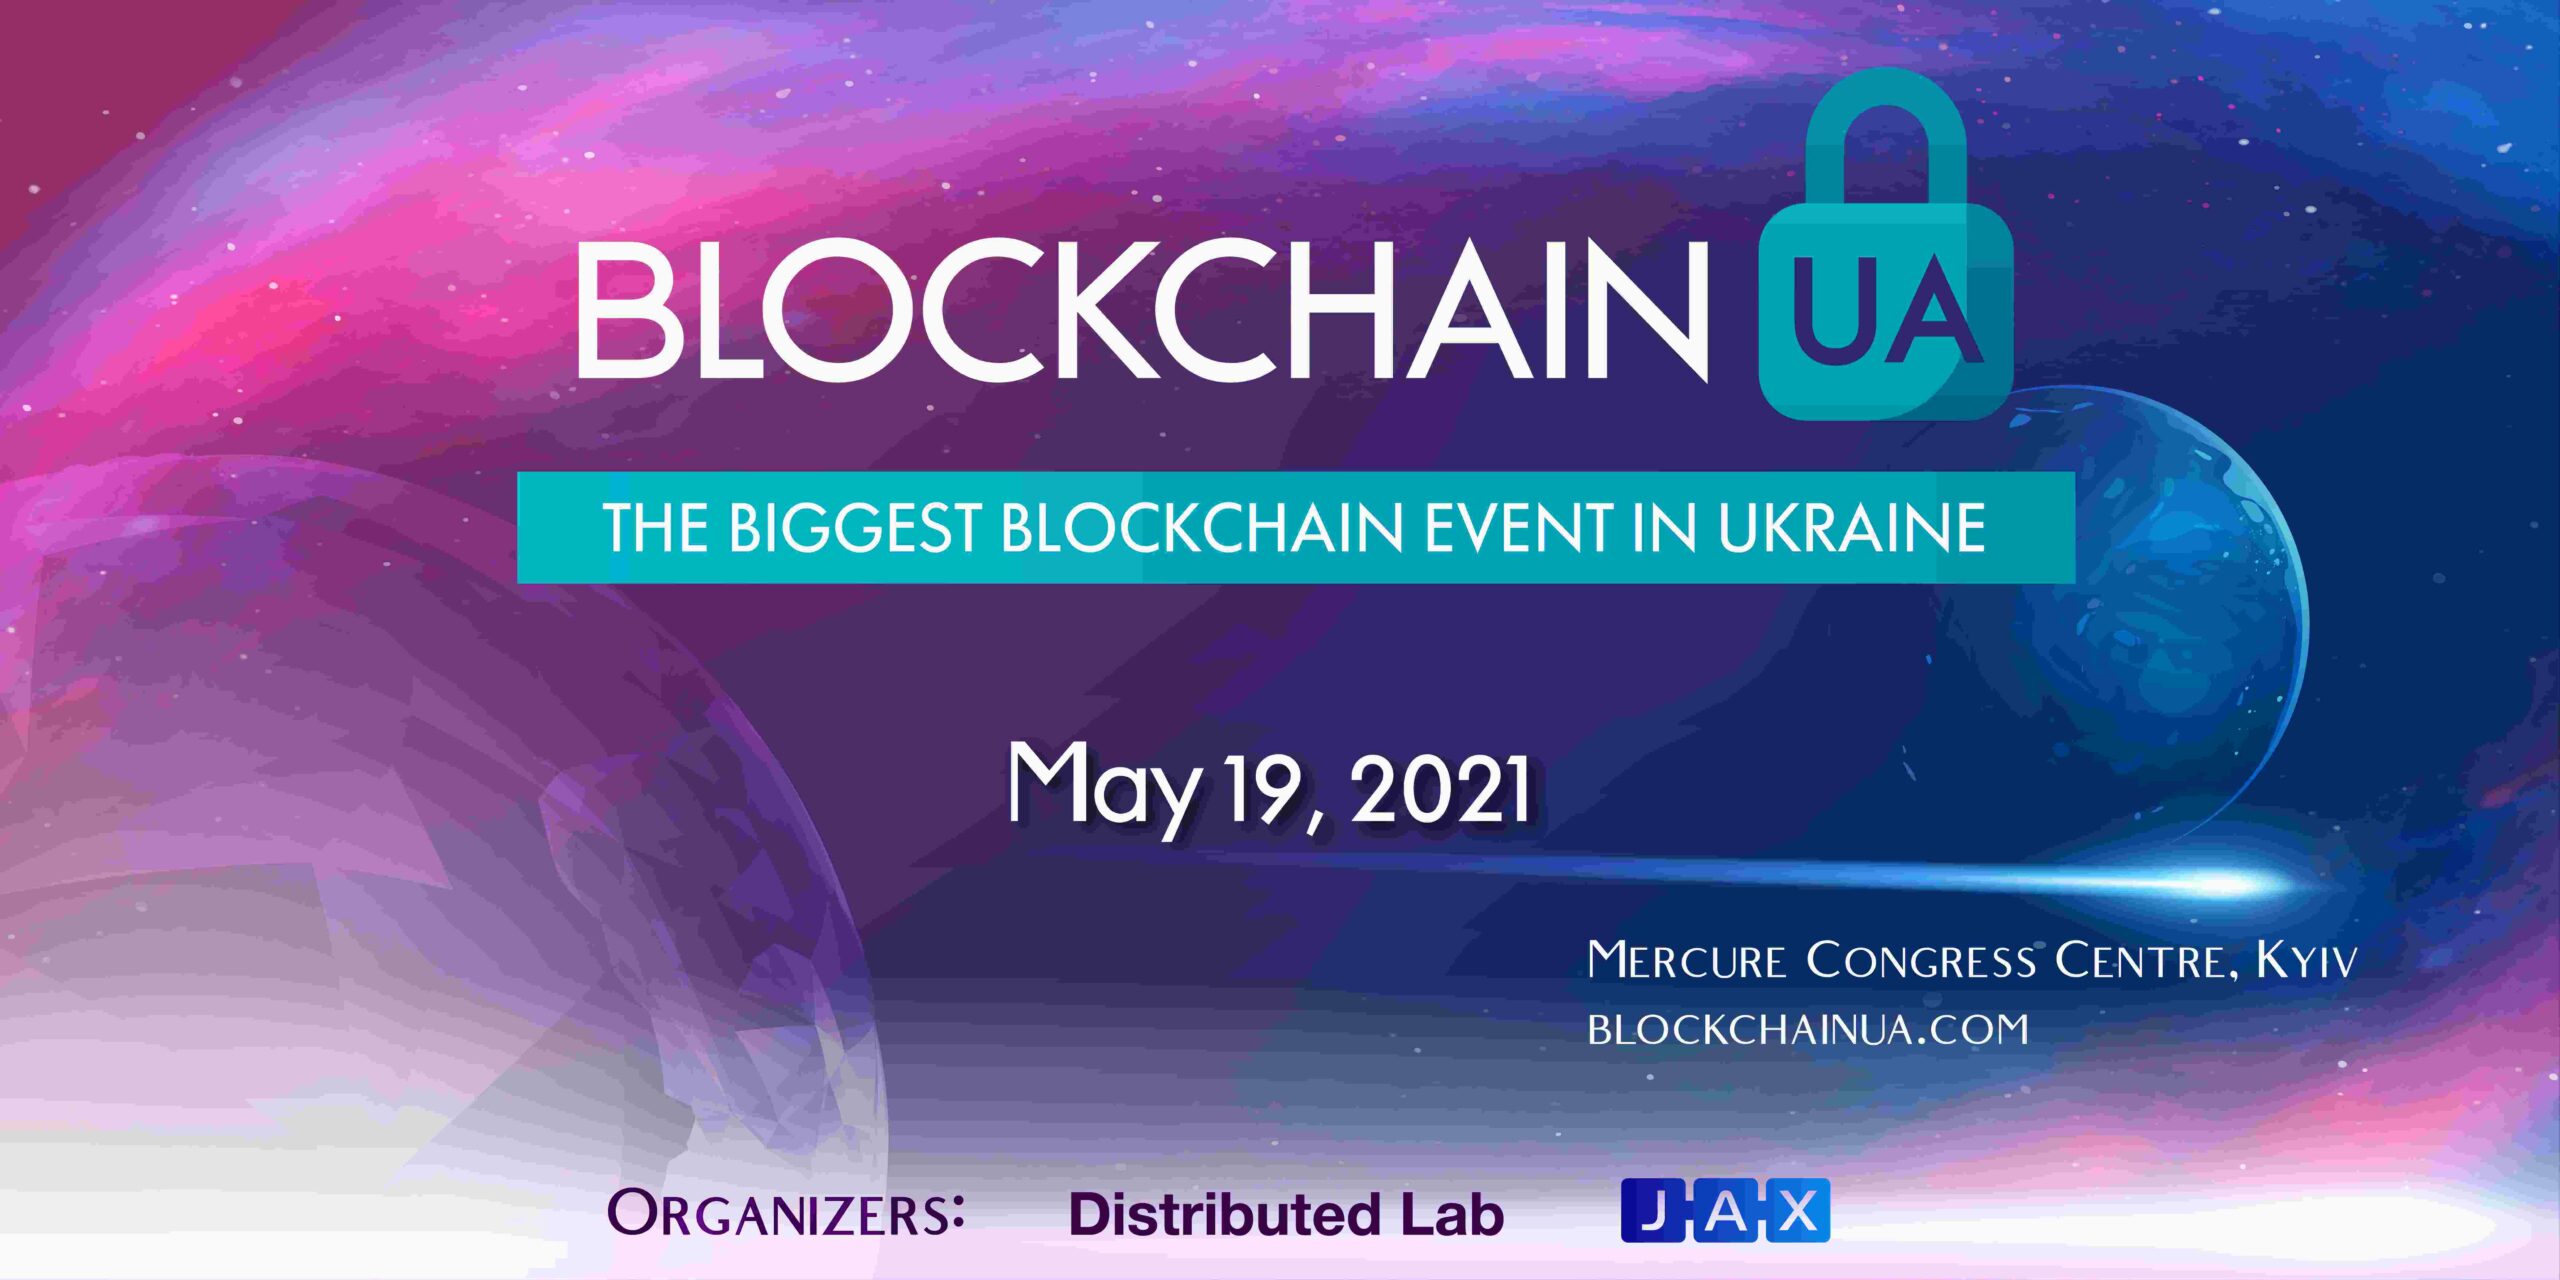 BlockchainUA’21 Conference is about to happen in Kyiv